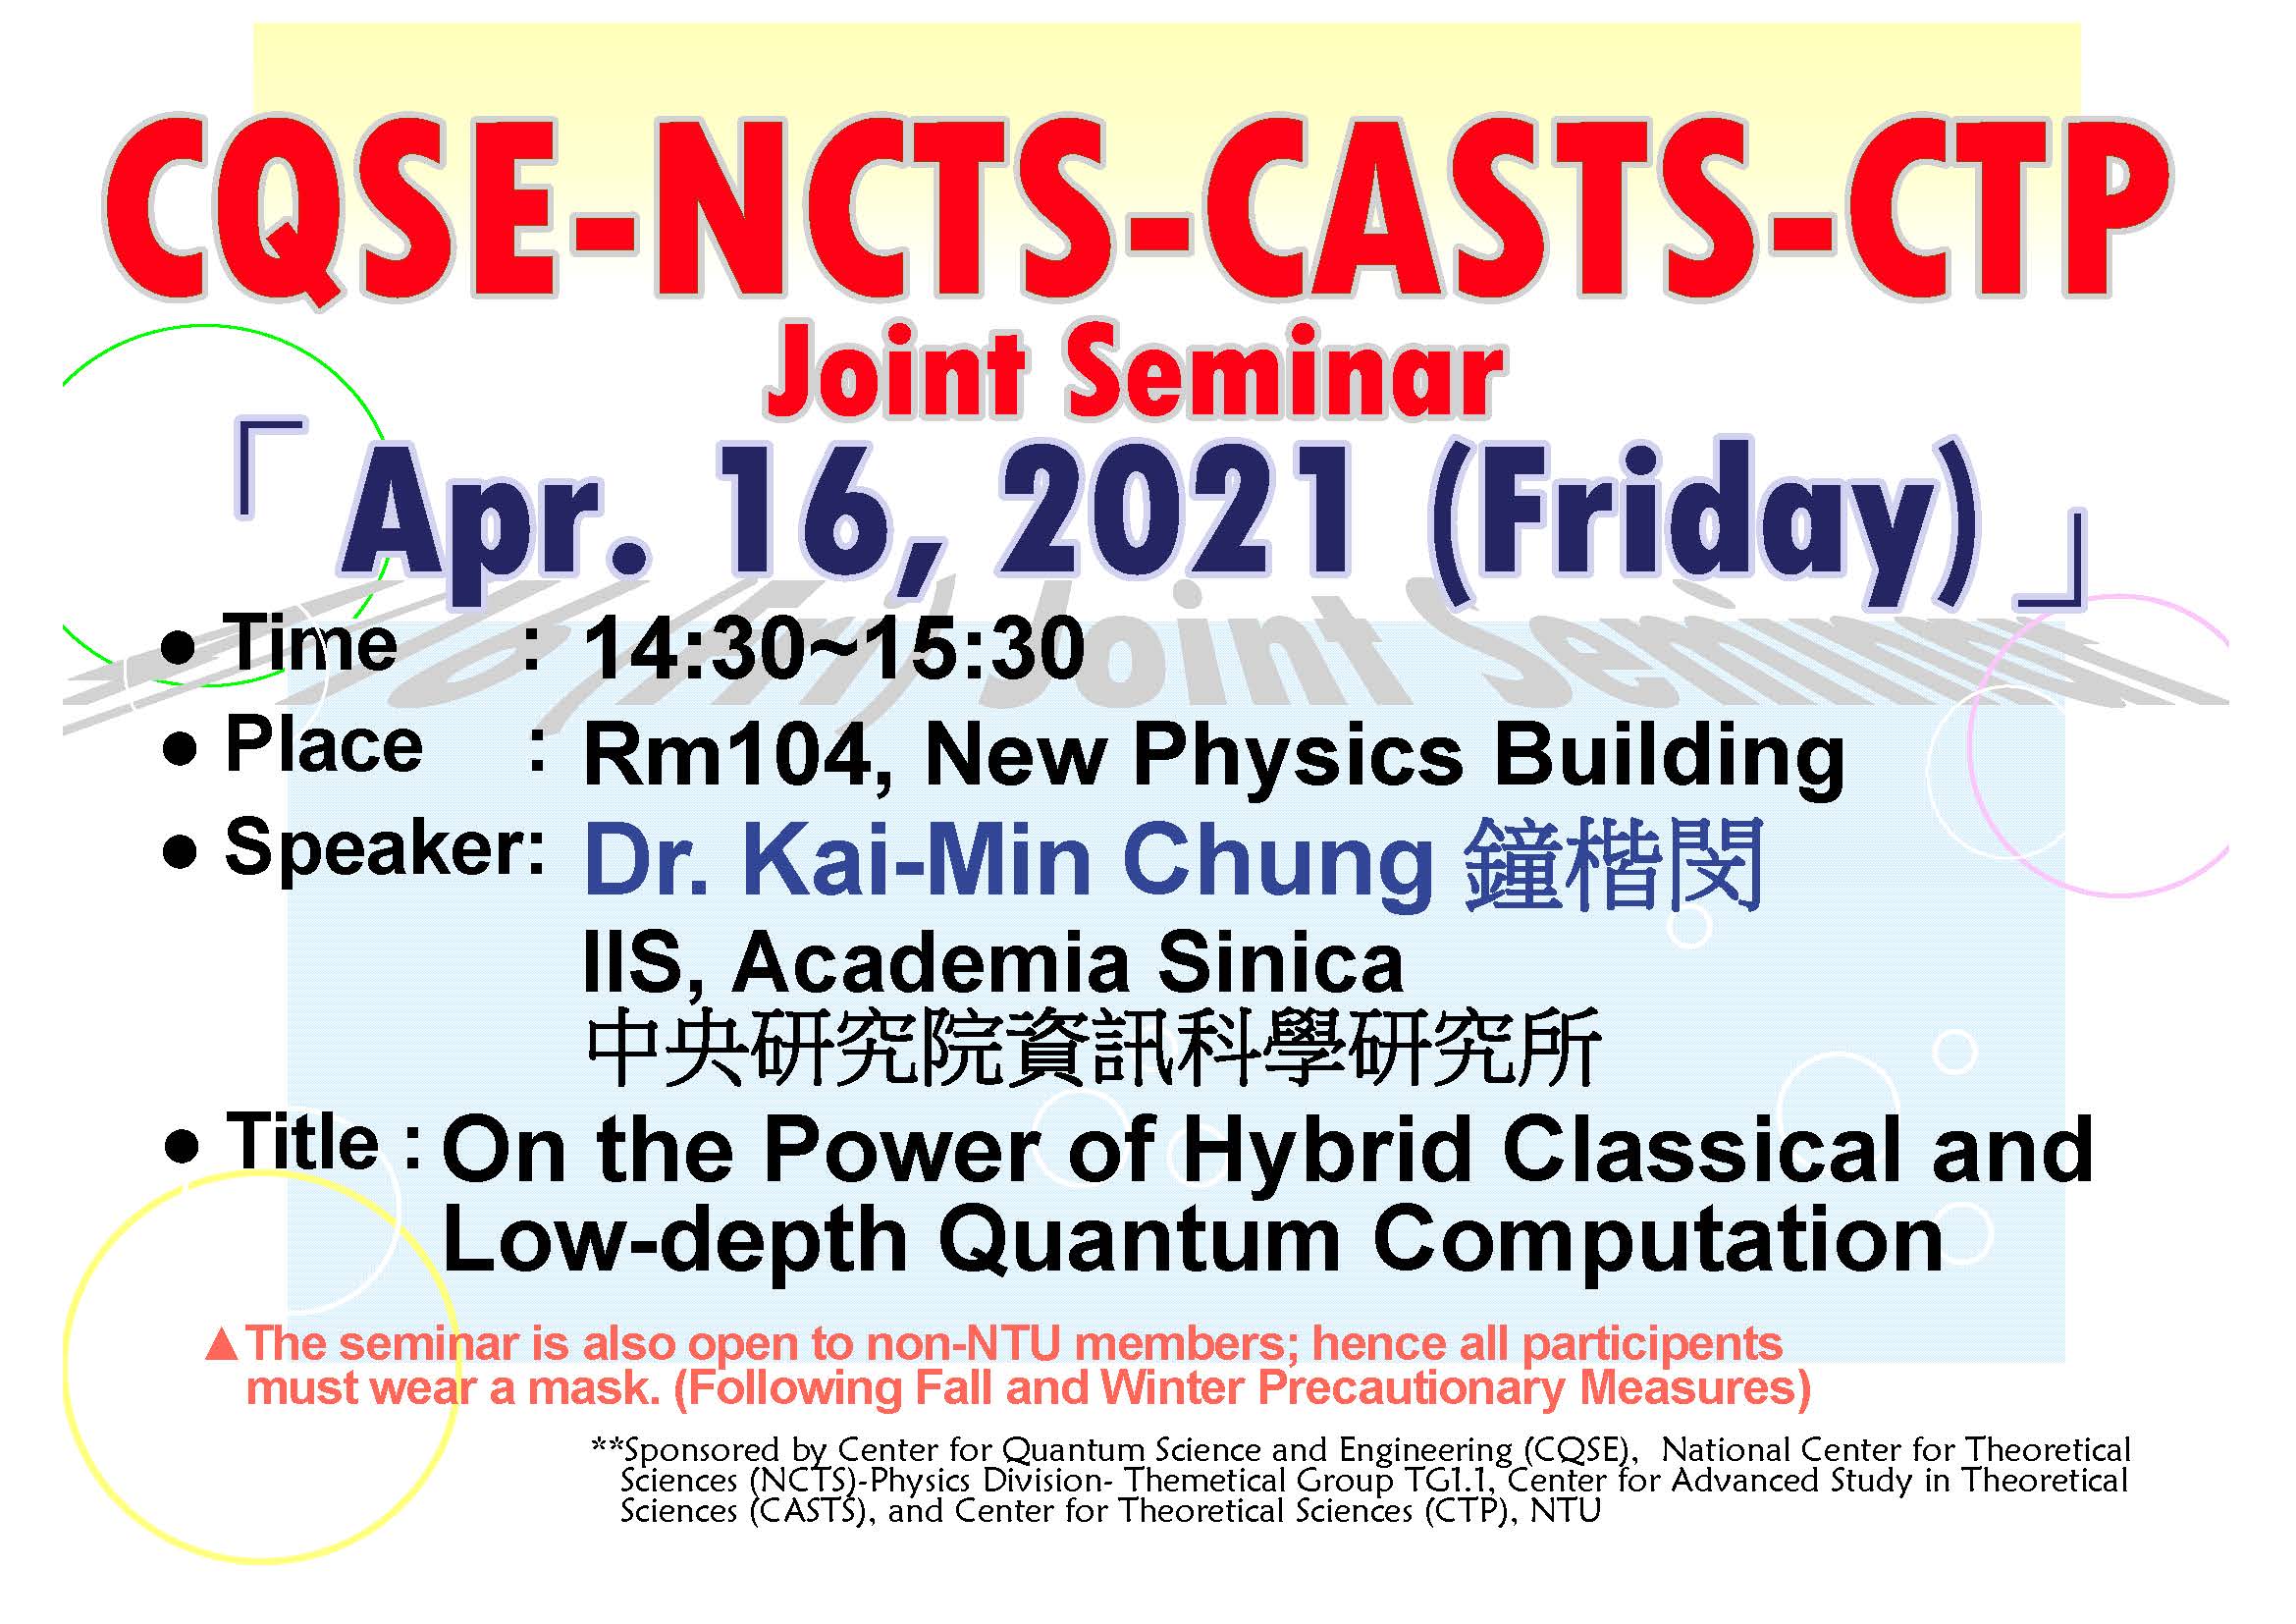 Joint CQSE-NCTS-CASTS-CTP Seminar